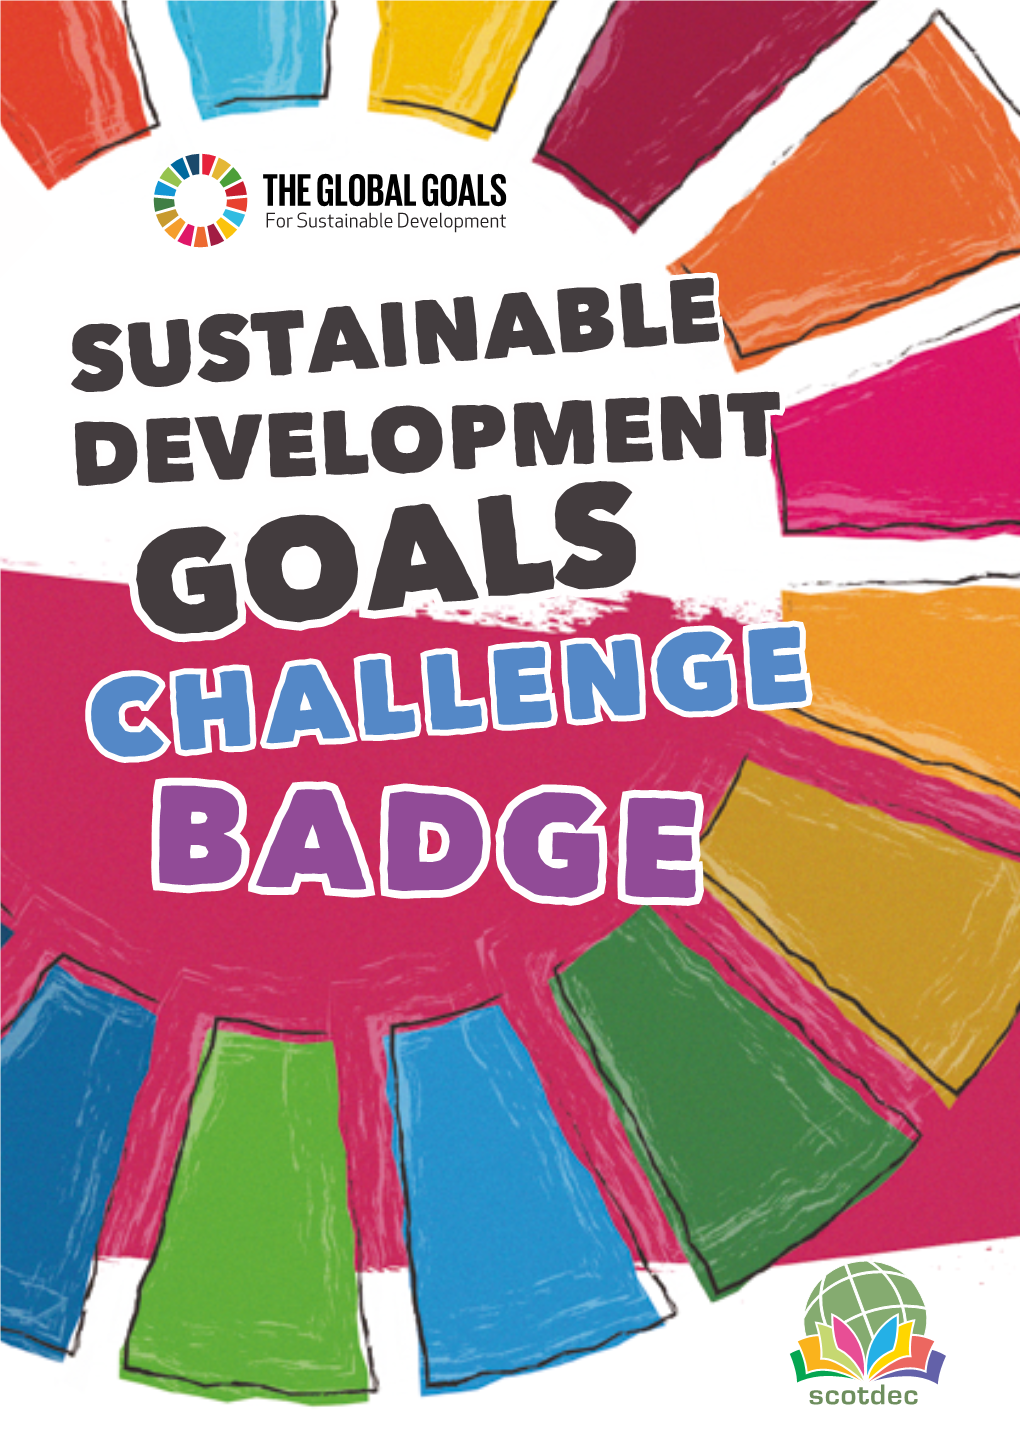 Challenge Badge Scotdec Is a Global Learning Centre Based in Edinburgh, Working to Put Global Citizenship at the Heart of Education